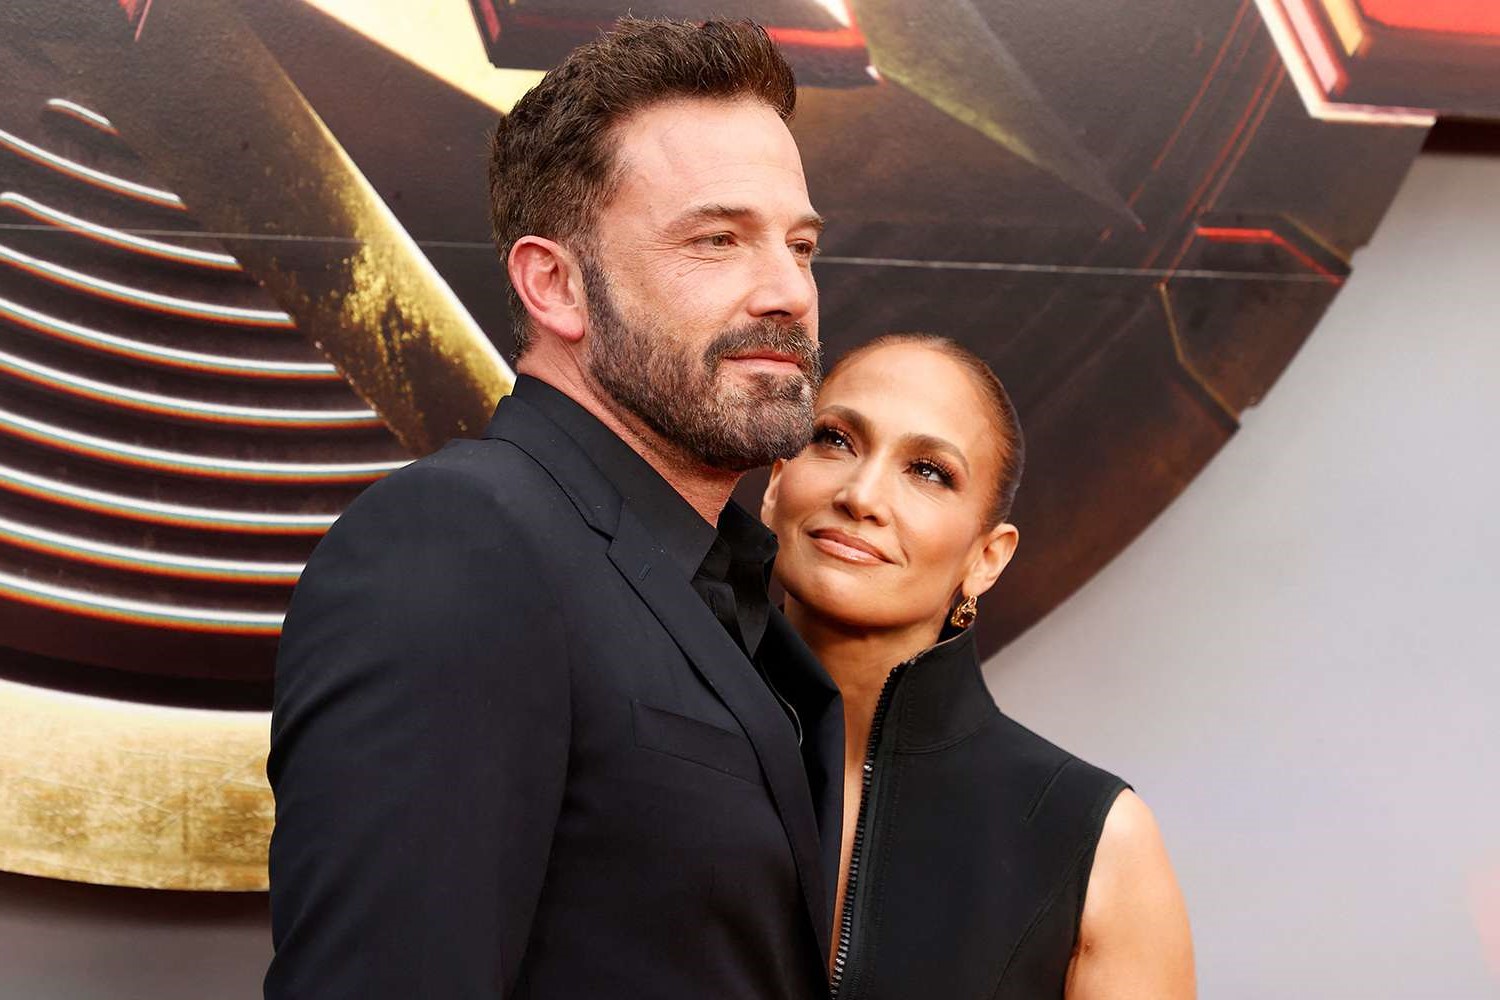 Jennifer Lopez And Ben Affleck Demonstrate Good Manners After Watching ‘Dune 2’ In Theater